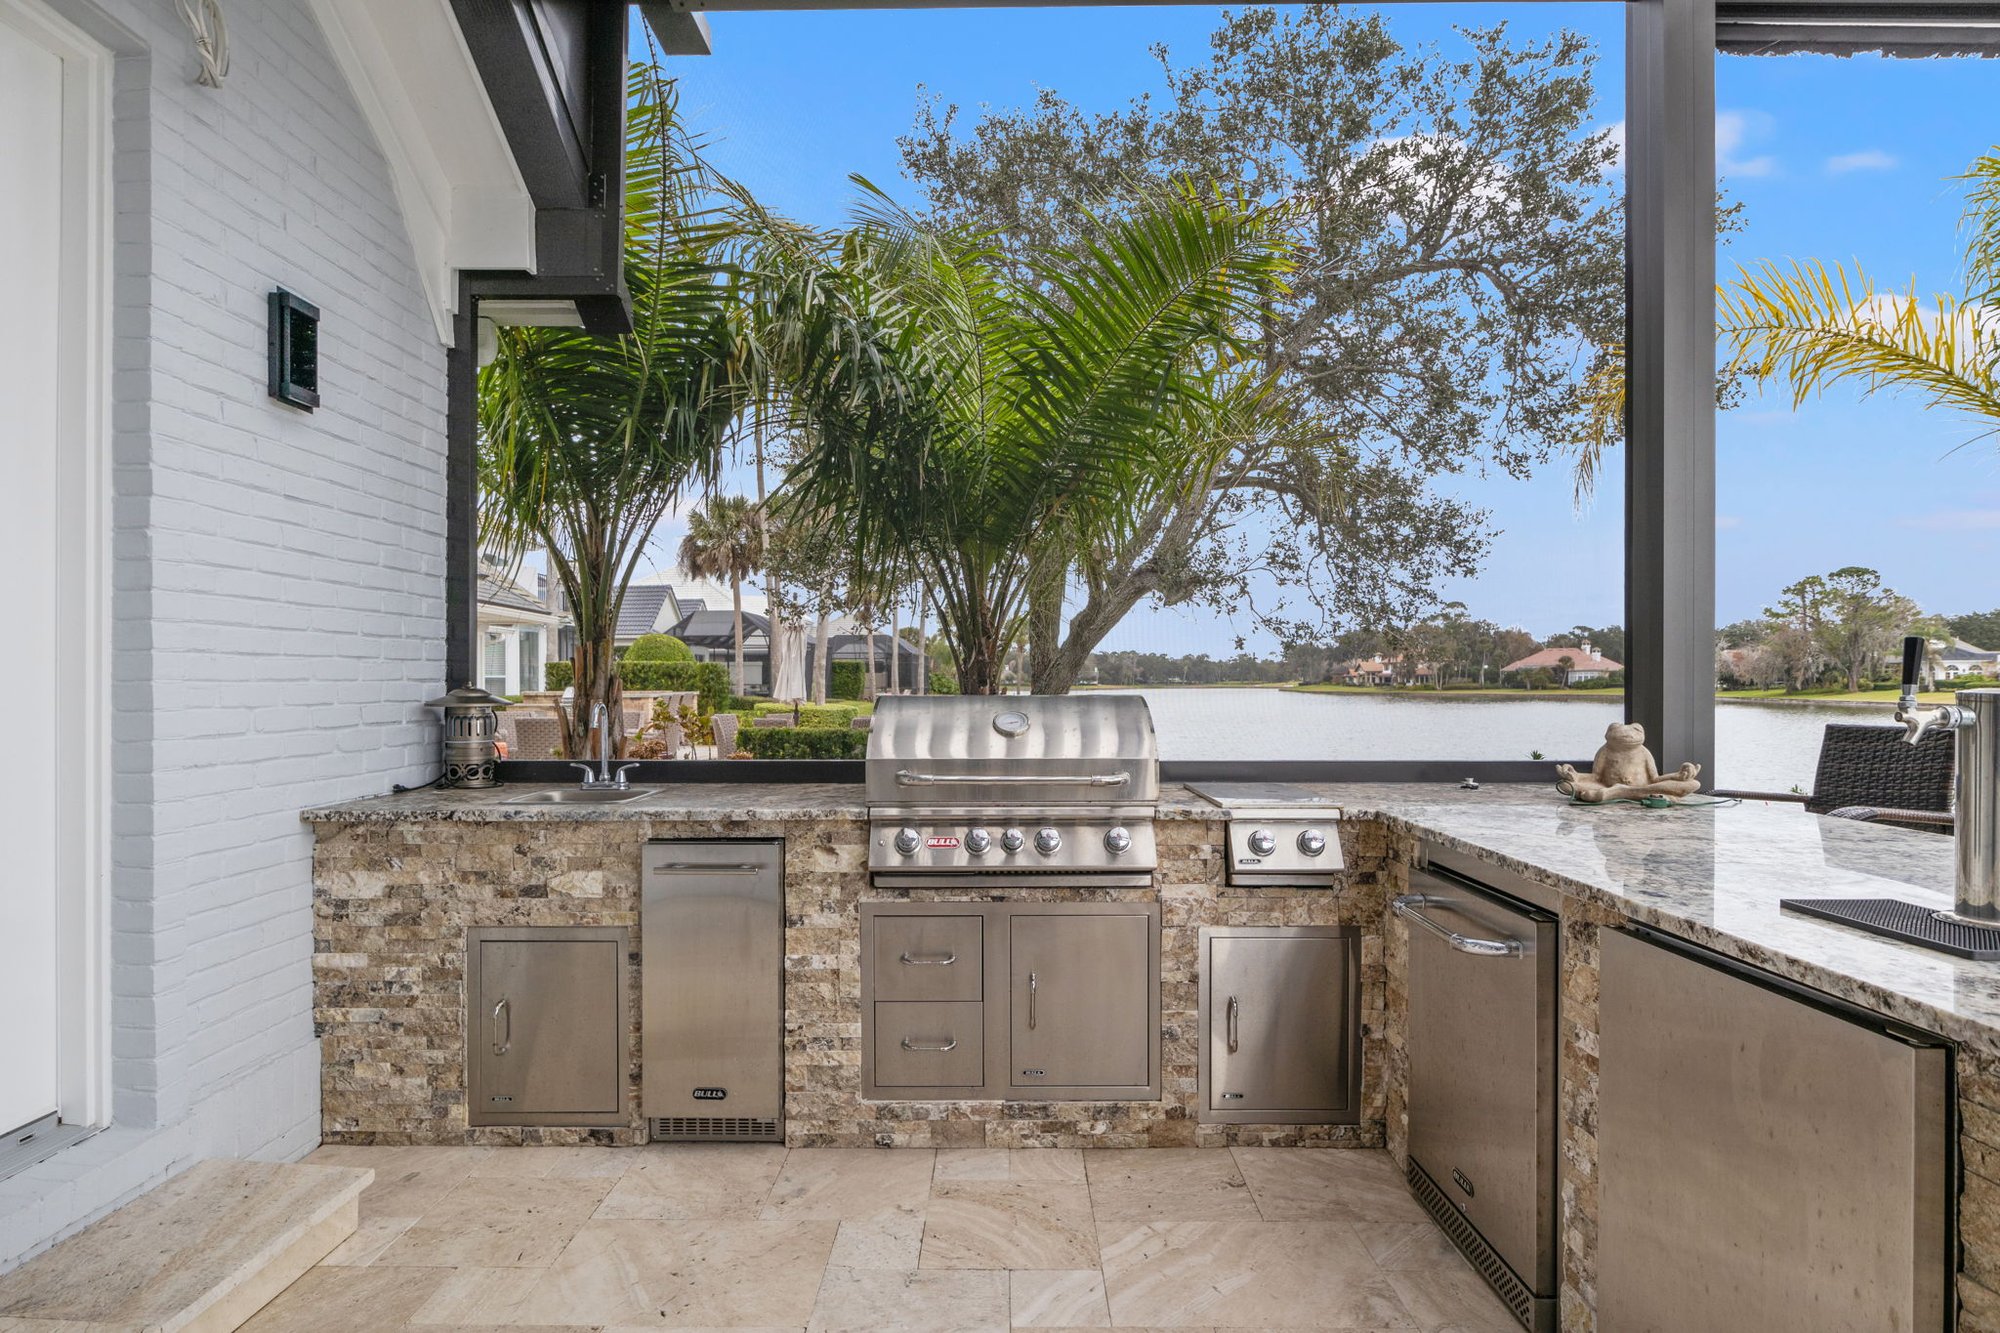 Stacked Stone Cladding on Summer Kitchen for Jacksonville Outdoor Living Space